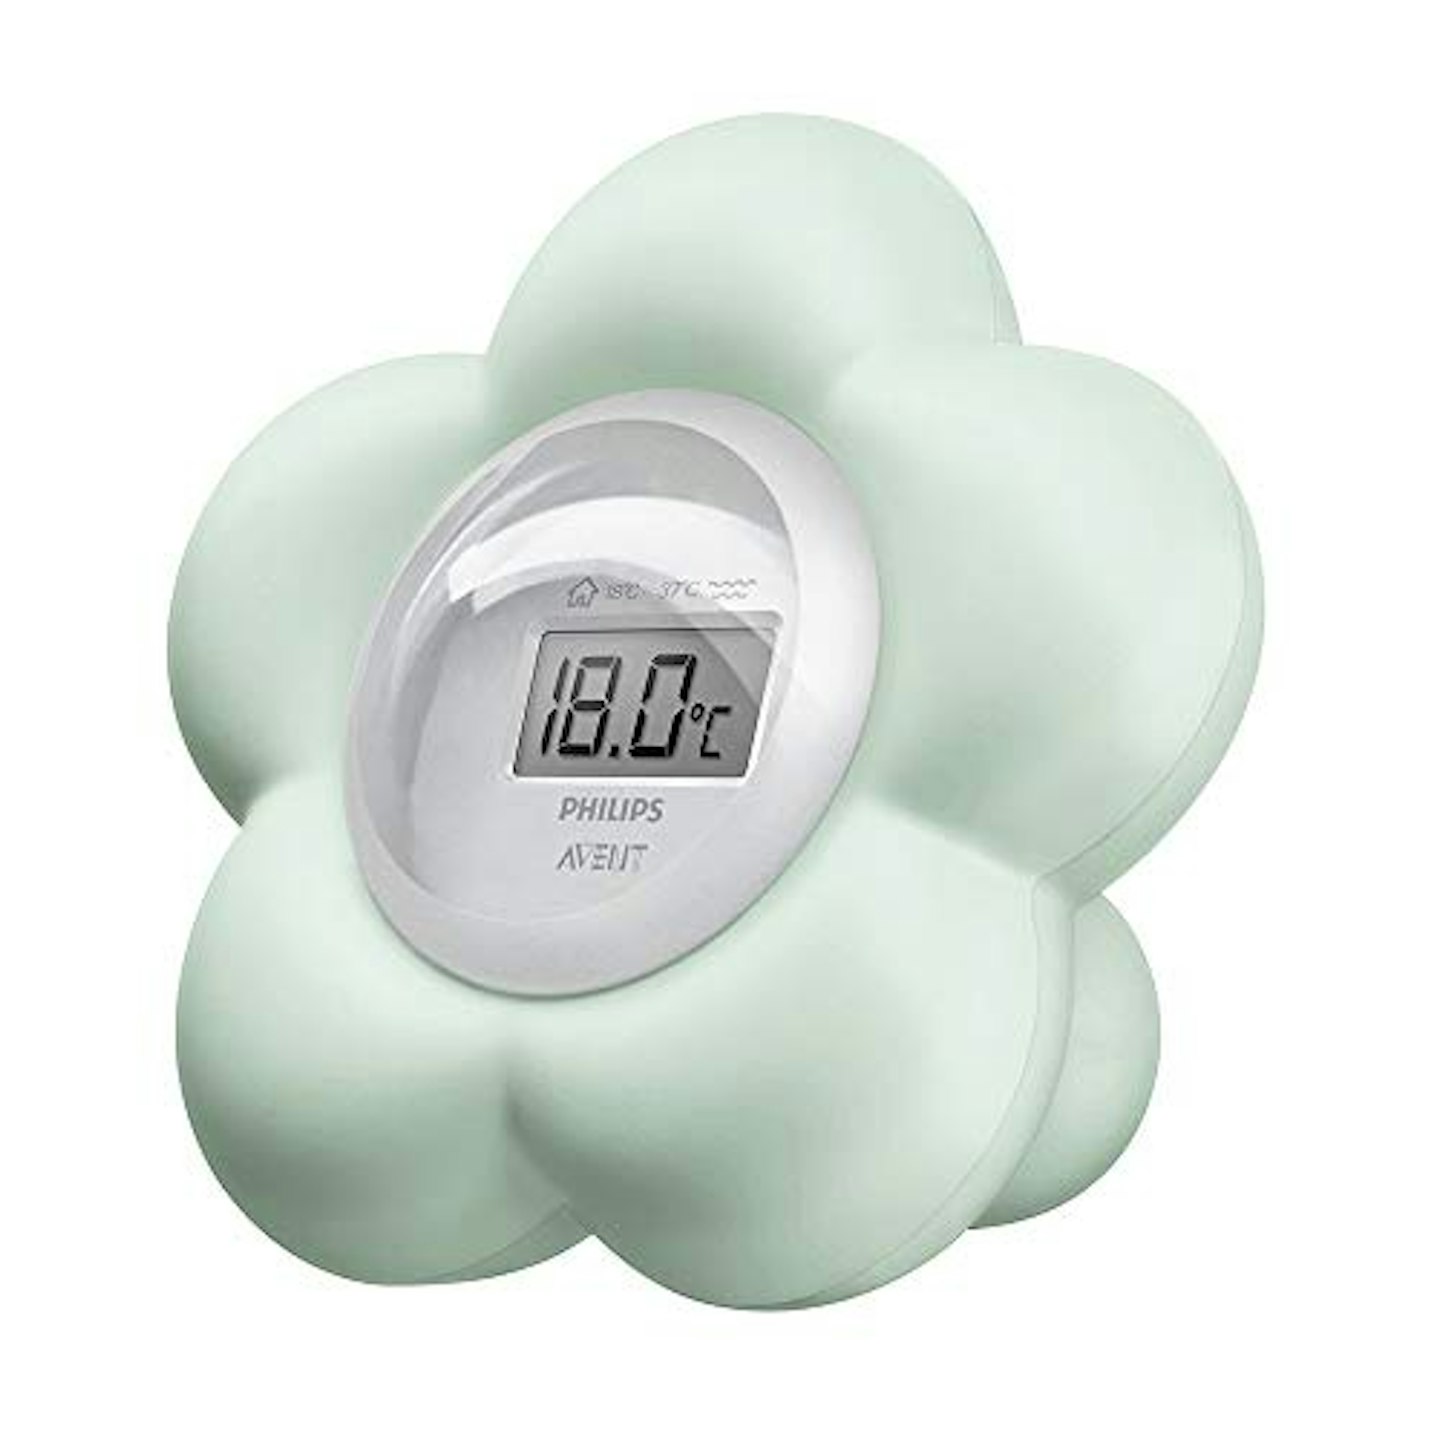 Philips Avent SCH480/00 Baby Bedroom and Bathroom Digital Thermometer